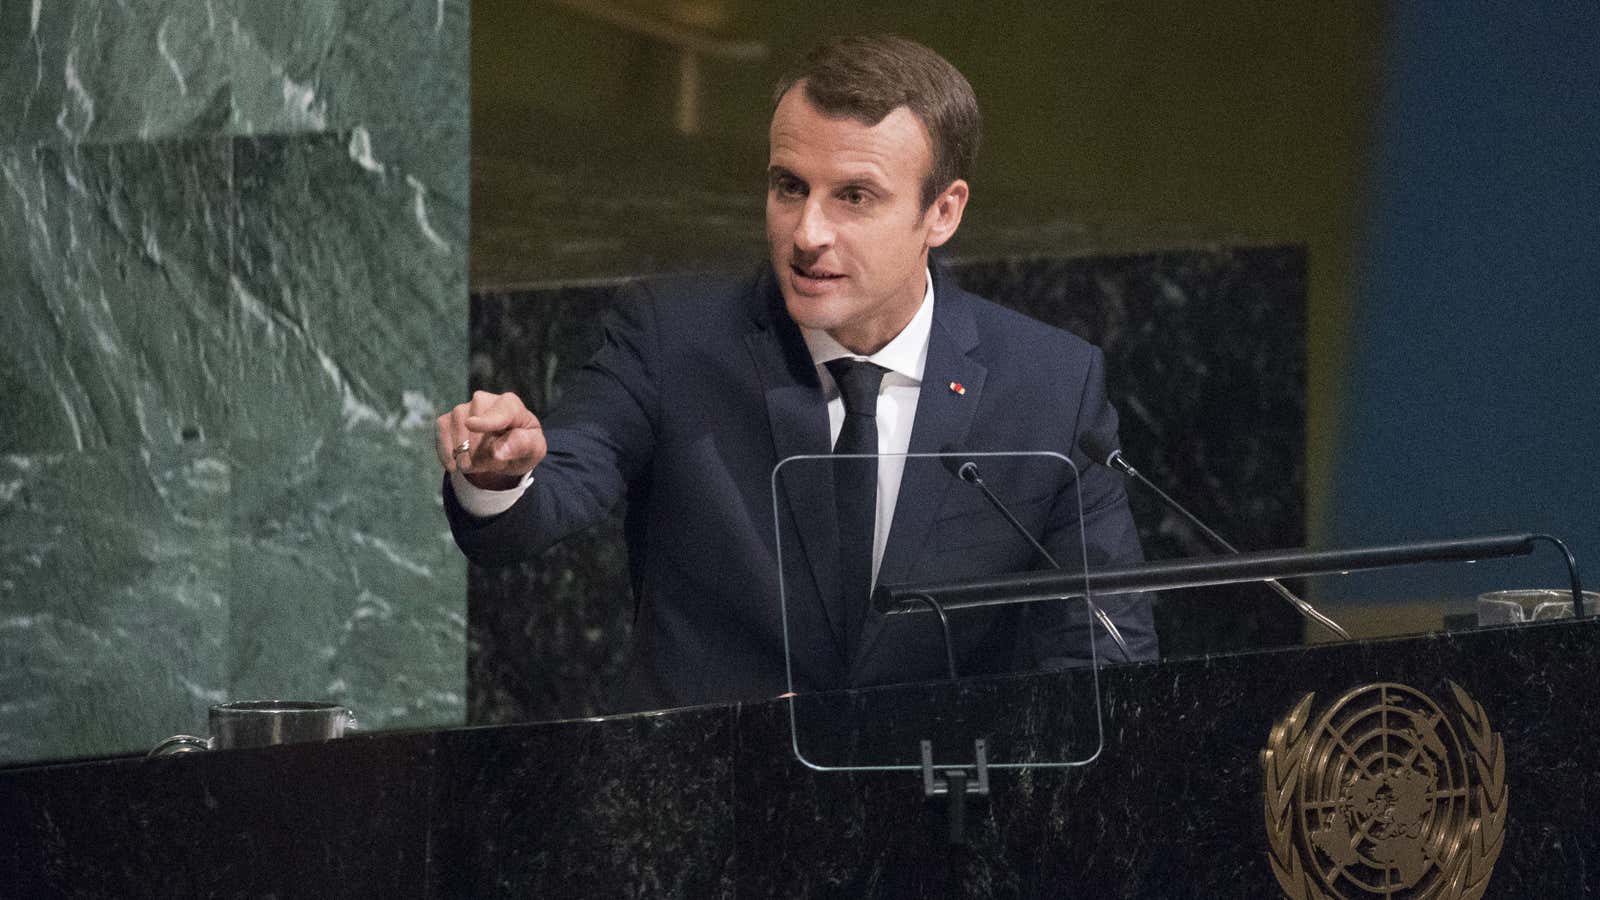 Can the young French president take on global leadership?